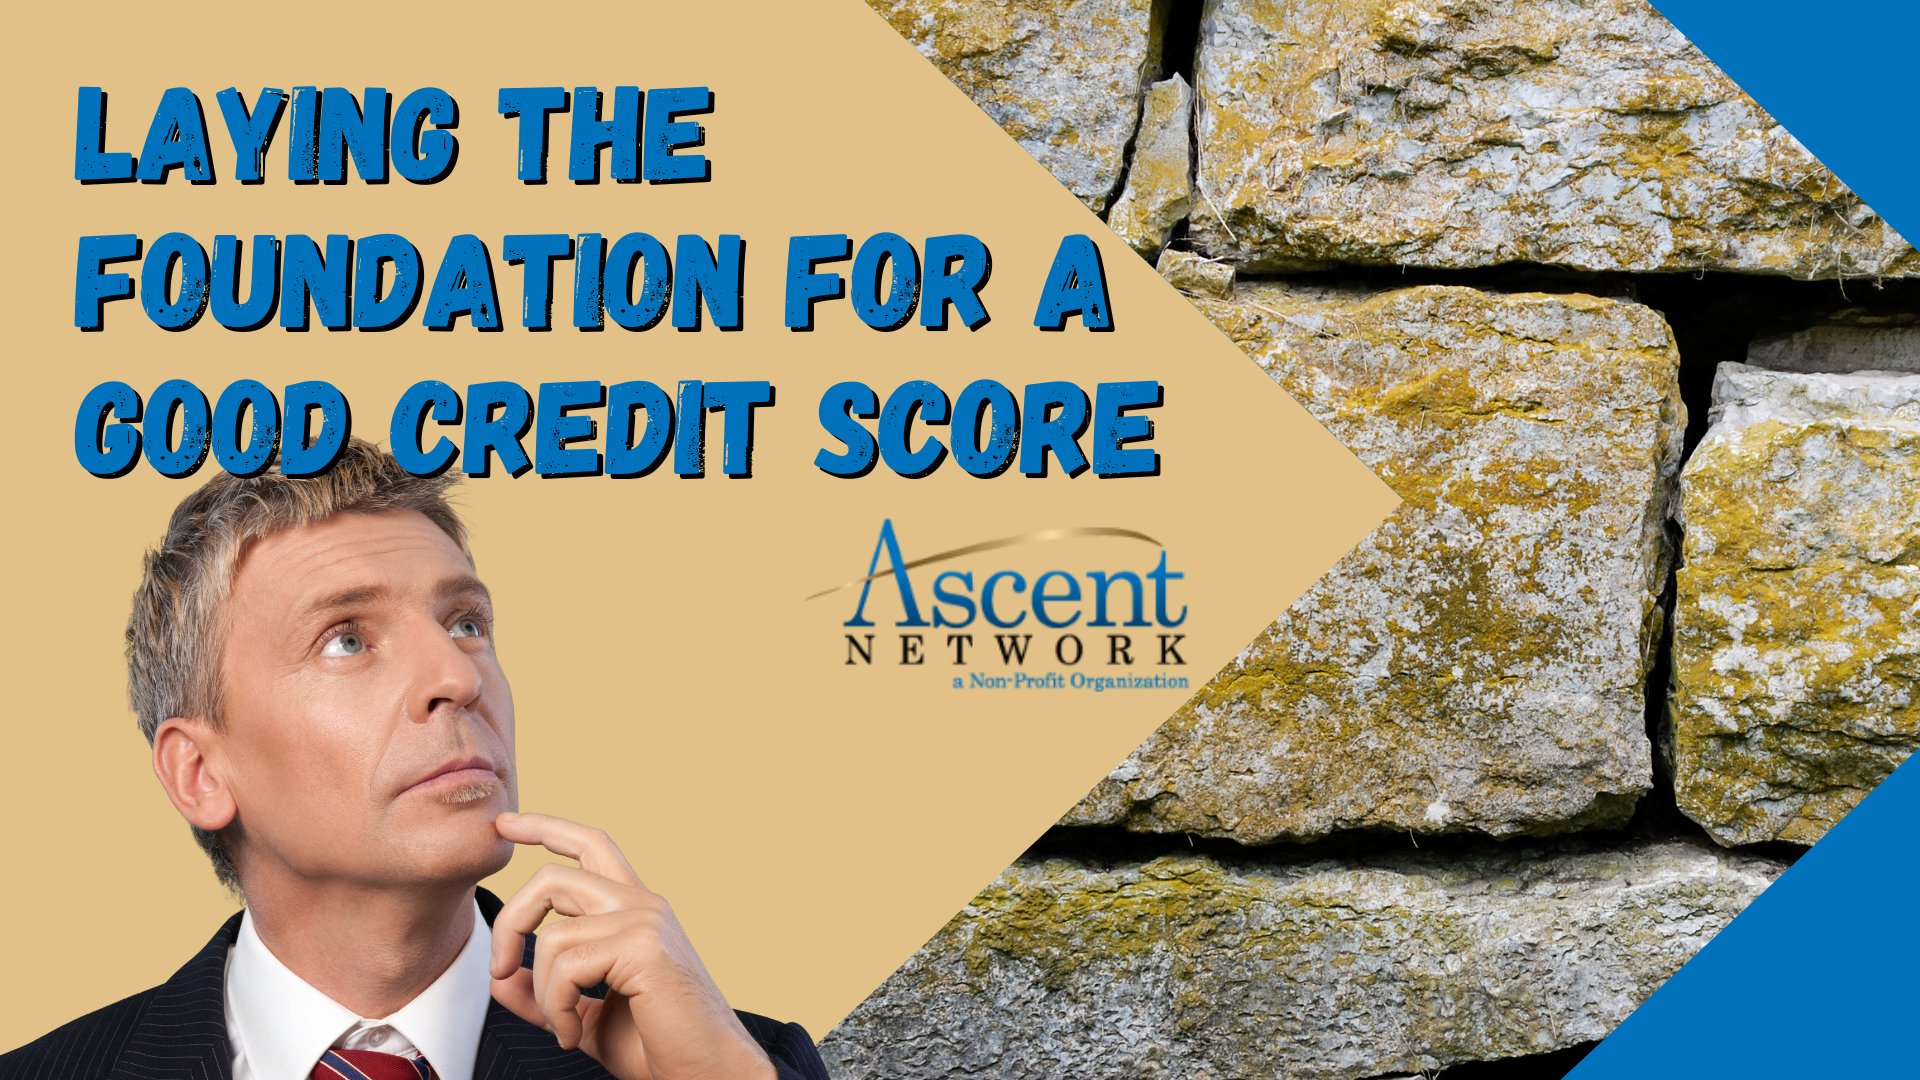 Laying the Foundation for a Good Credit Score